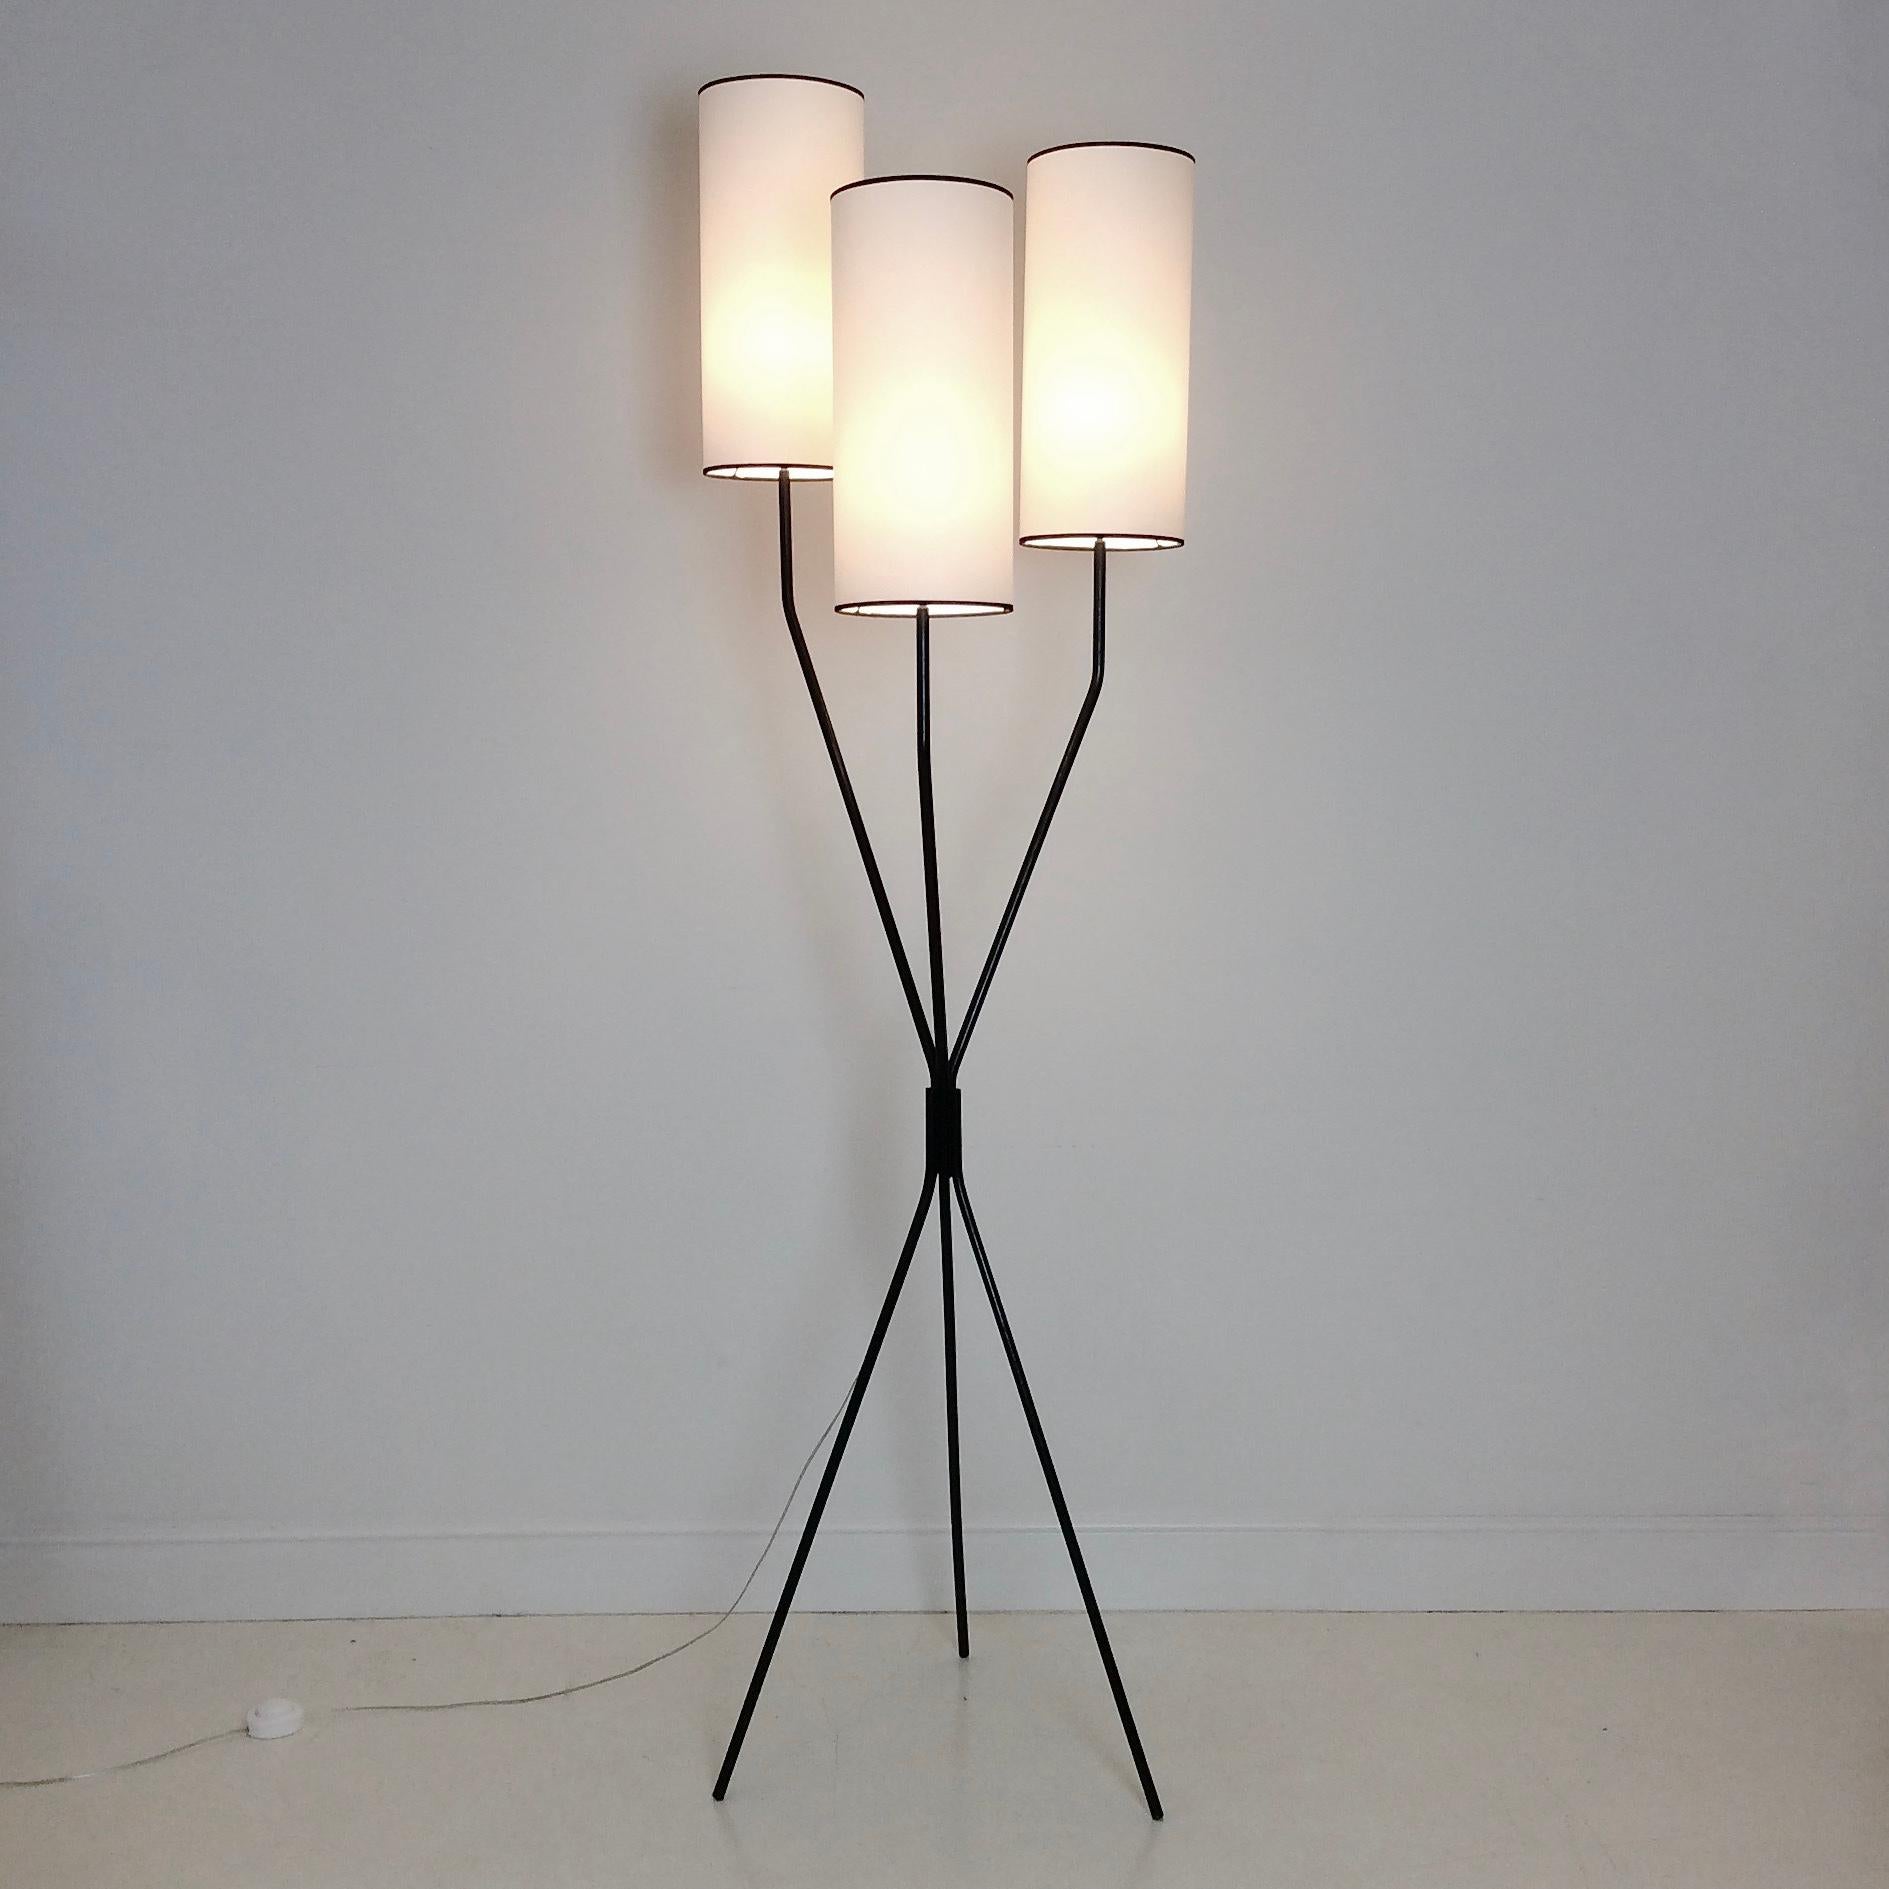 Nice mid-century floor lamp, circa 1950, France.
3 black tubular steel feet, brass details, each socket is mounted on ball joints for a perfect positioning of shades.
3 new white fabric shades with thin black edge,
Rewired, 3 E14 bulbs of 40